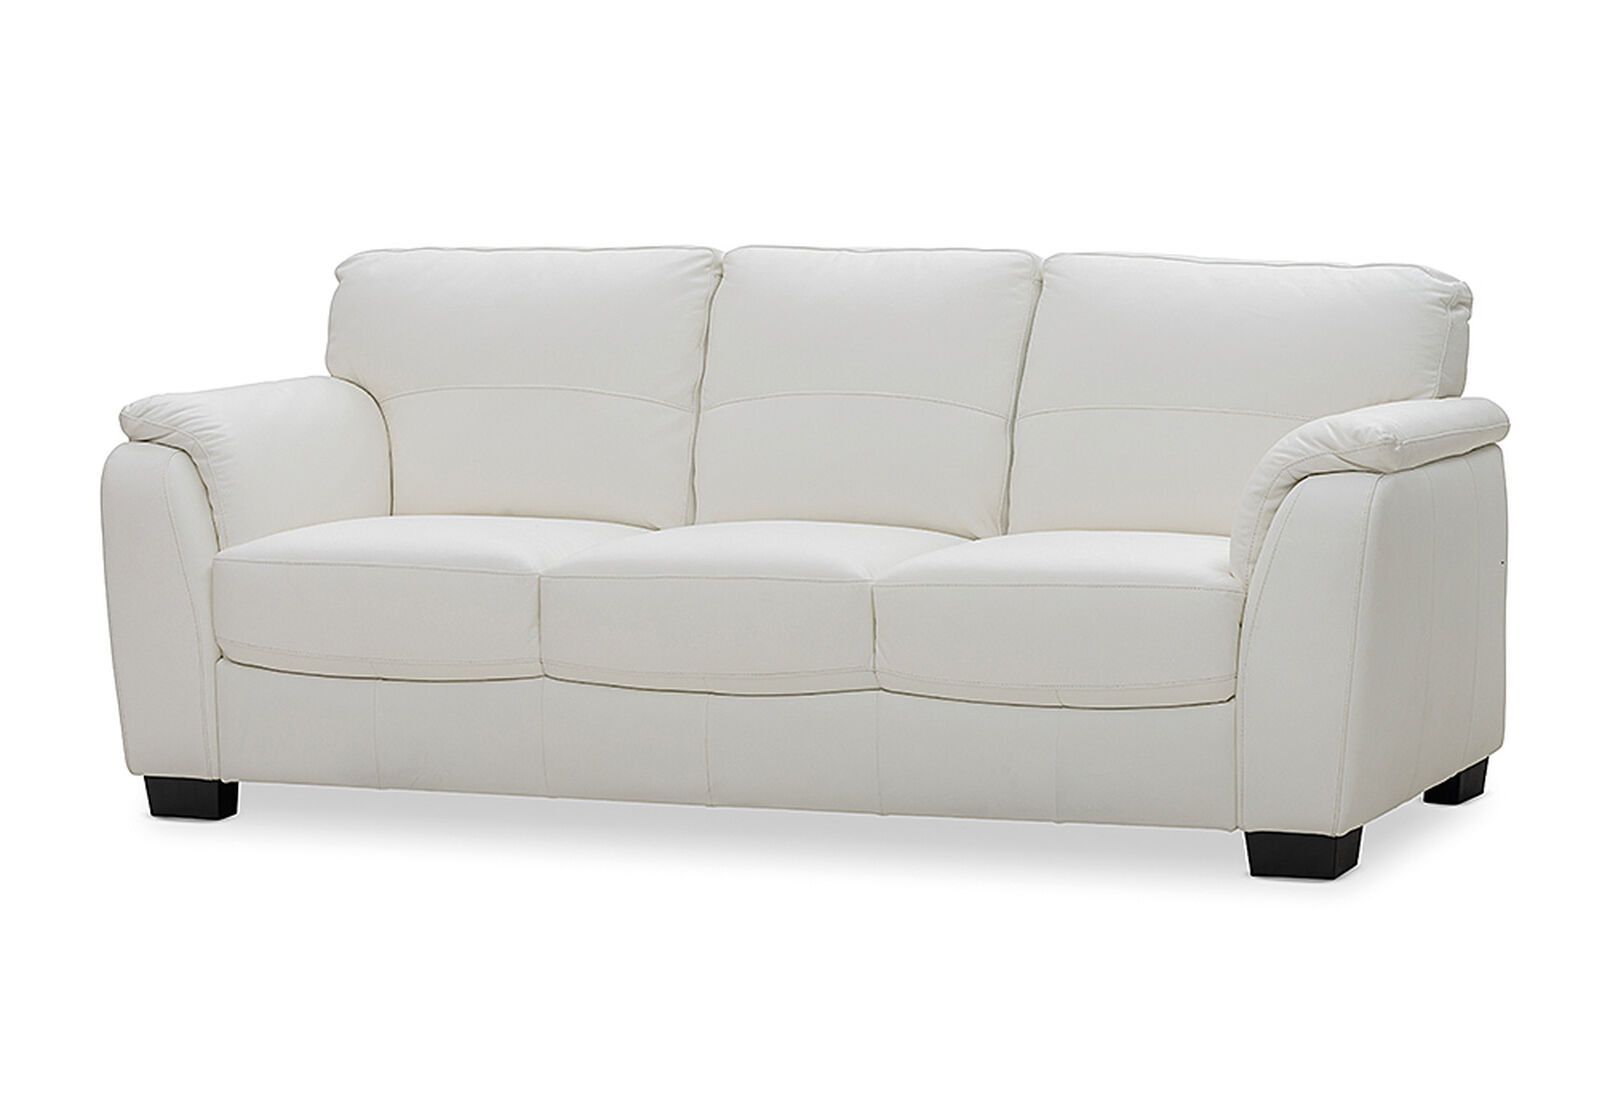 3 Seater Sofa Amart Furniture, Leather White Couch